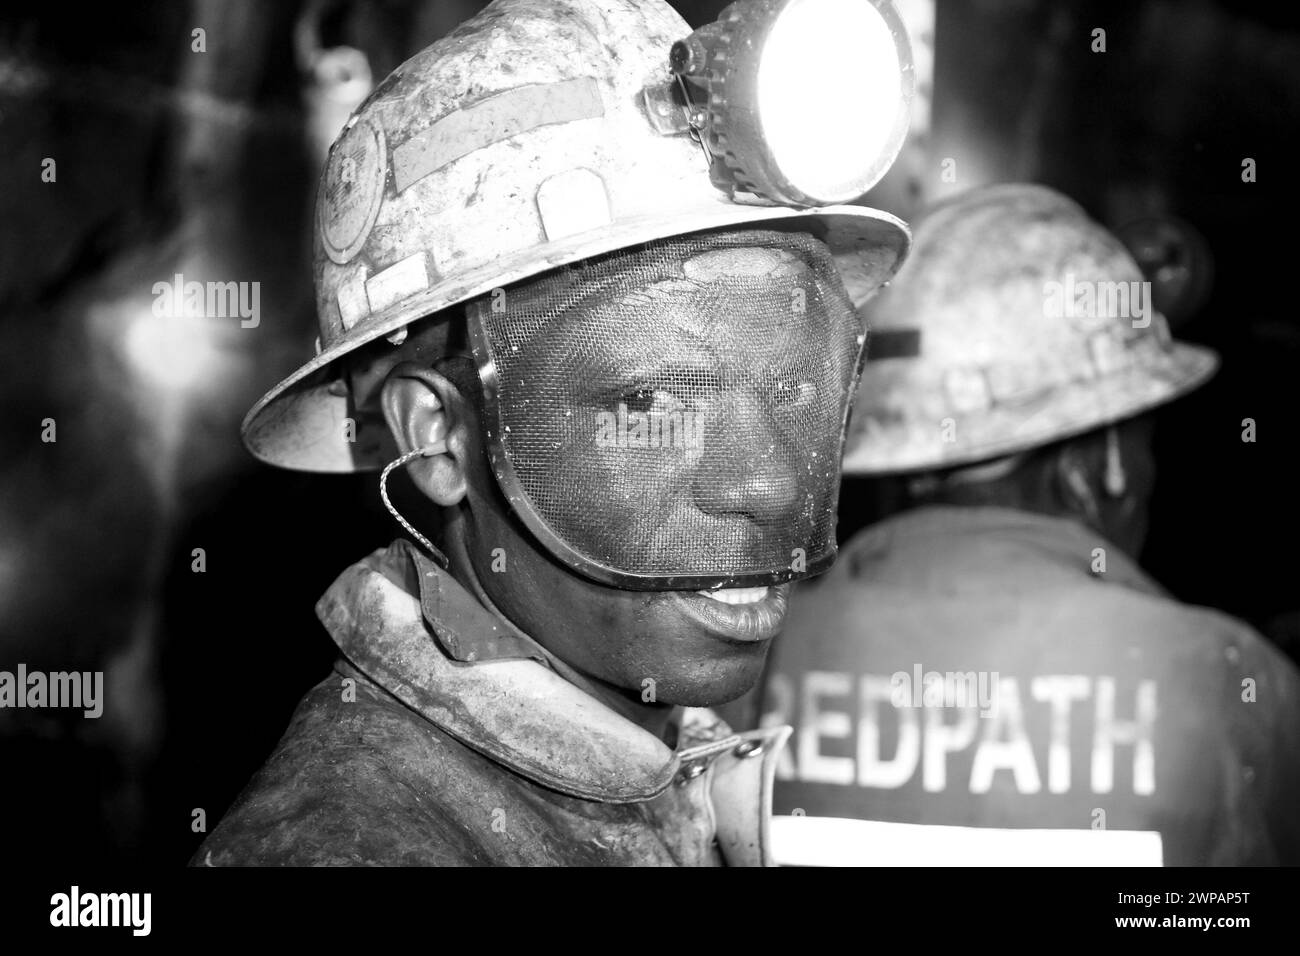 A coal miner wearing safety gear in dim light Stock Photo